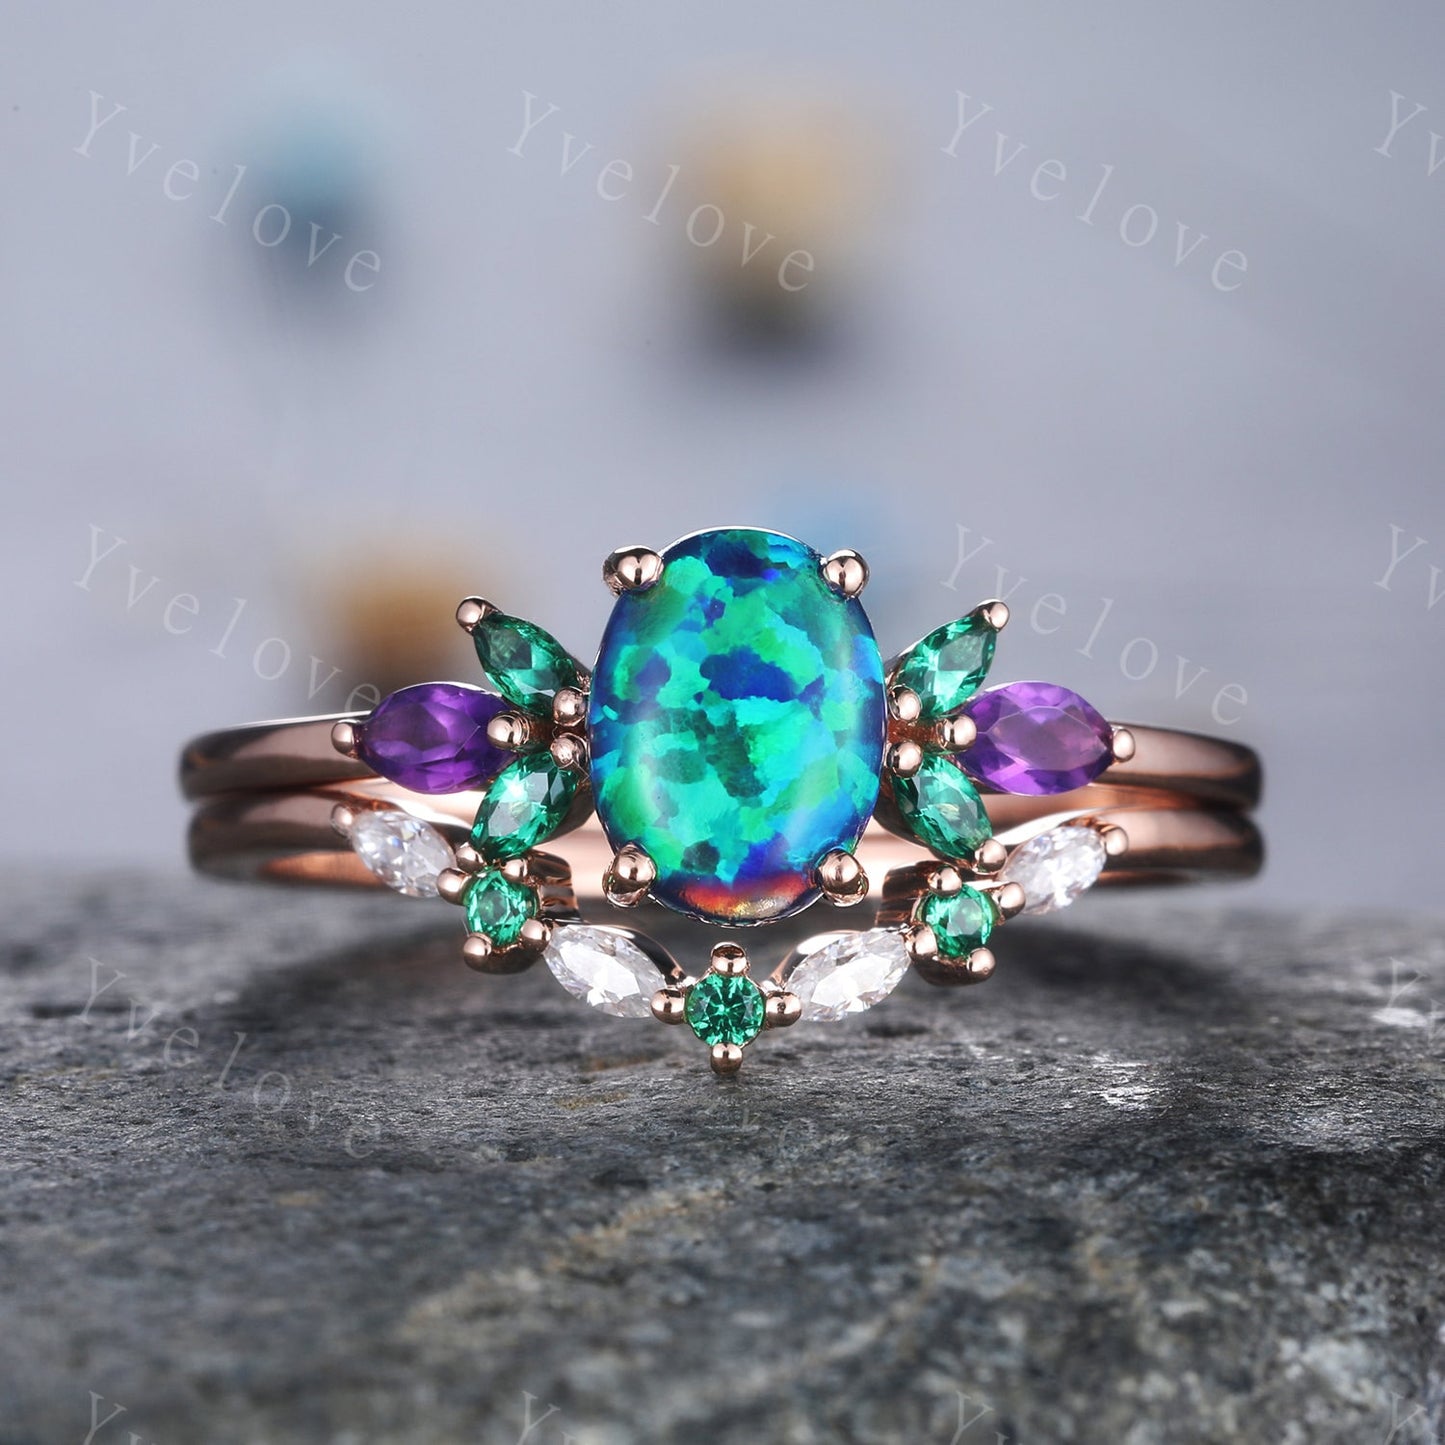 Blue Sandstone Wedding Ring Set Oval Sandstone Engagement Ring14k Gold Wedding Ring Emerald Amethyst Floral Promise Jewelry Anniversary Gift